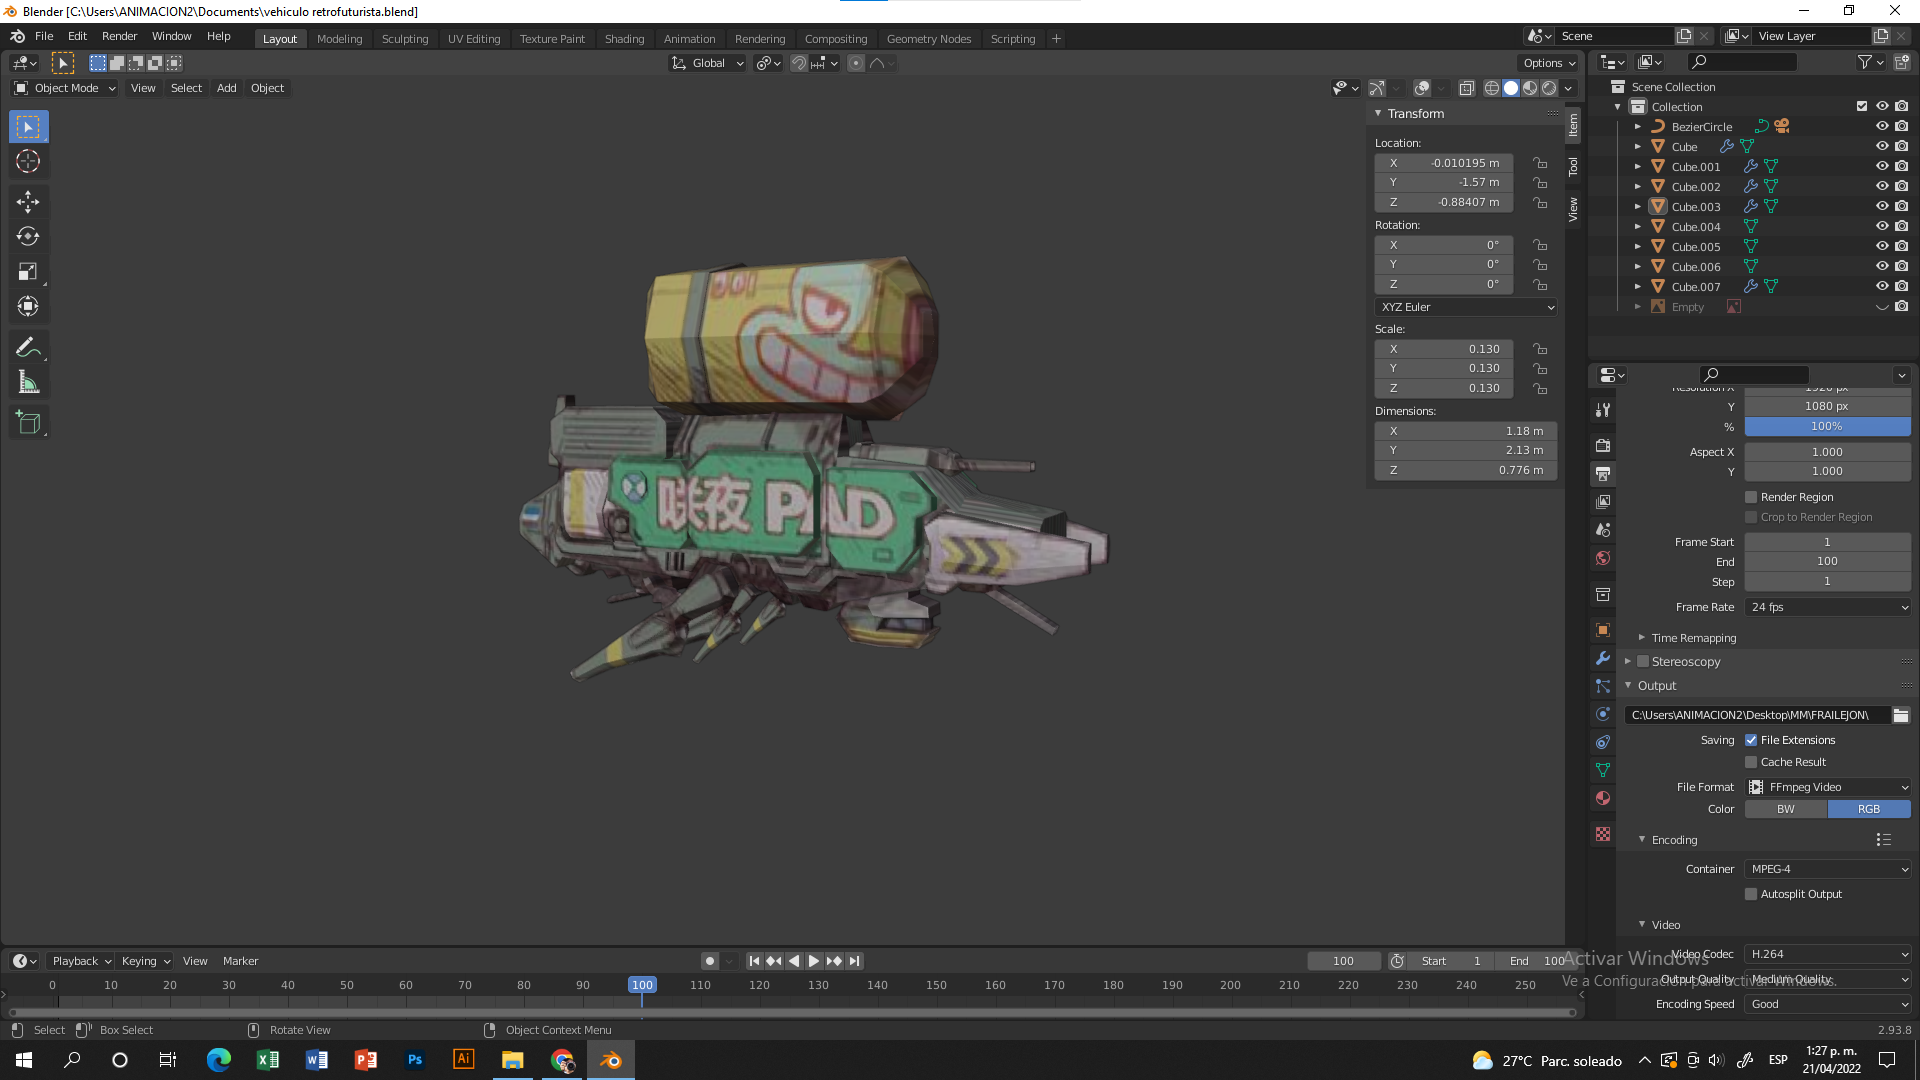 Space ship preview image 1